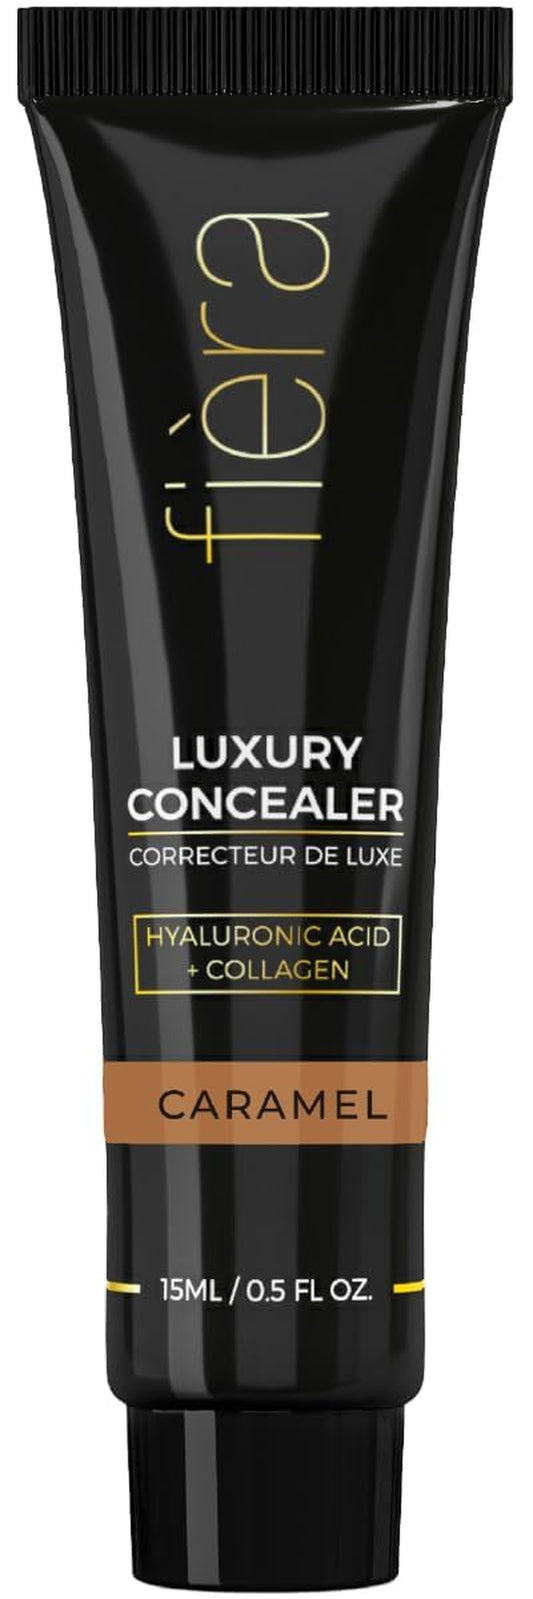 Luxury Concealer with Anti-Aging - All Day Coverage for Dark Circles, Fine Lines, Wrinkles & Spots - Caramel, 0.5 Ounce